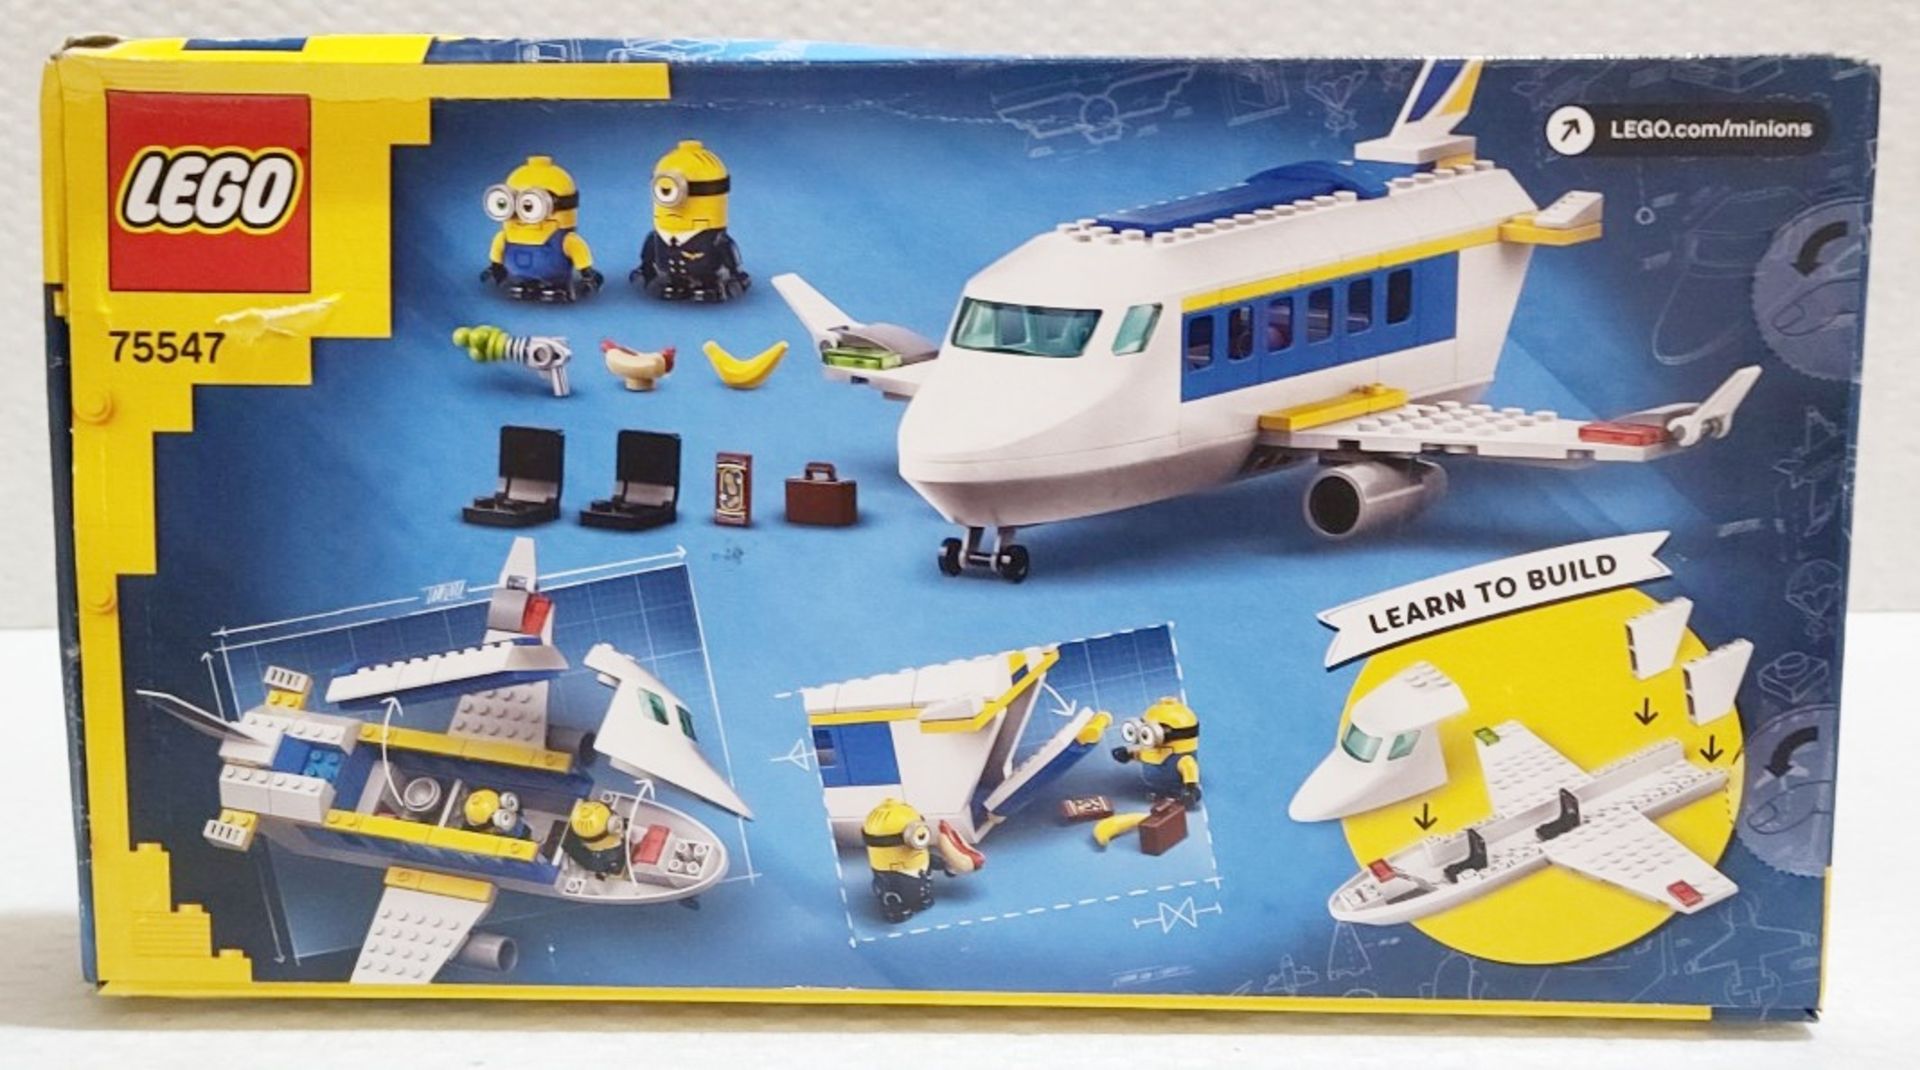 1 x LEGO Minions Pilot in Training Plane Toy - Unused Boxed Stock - Image 4 of 5